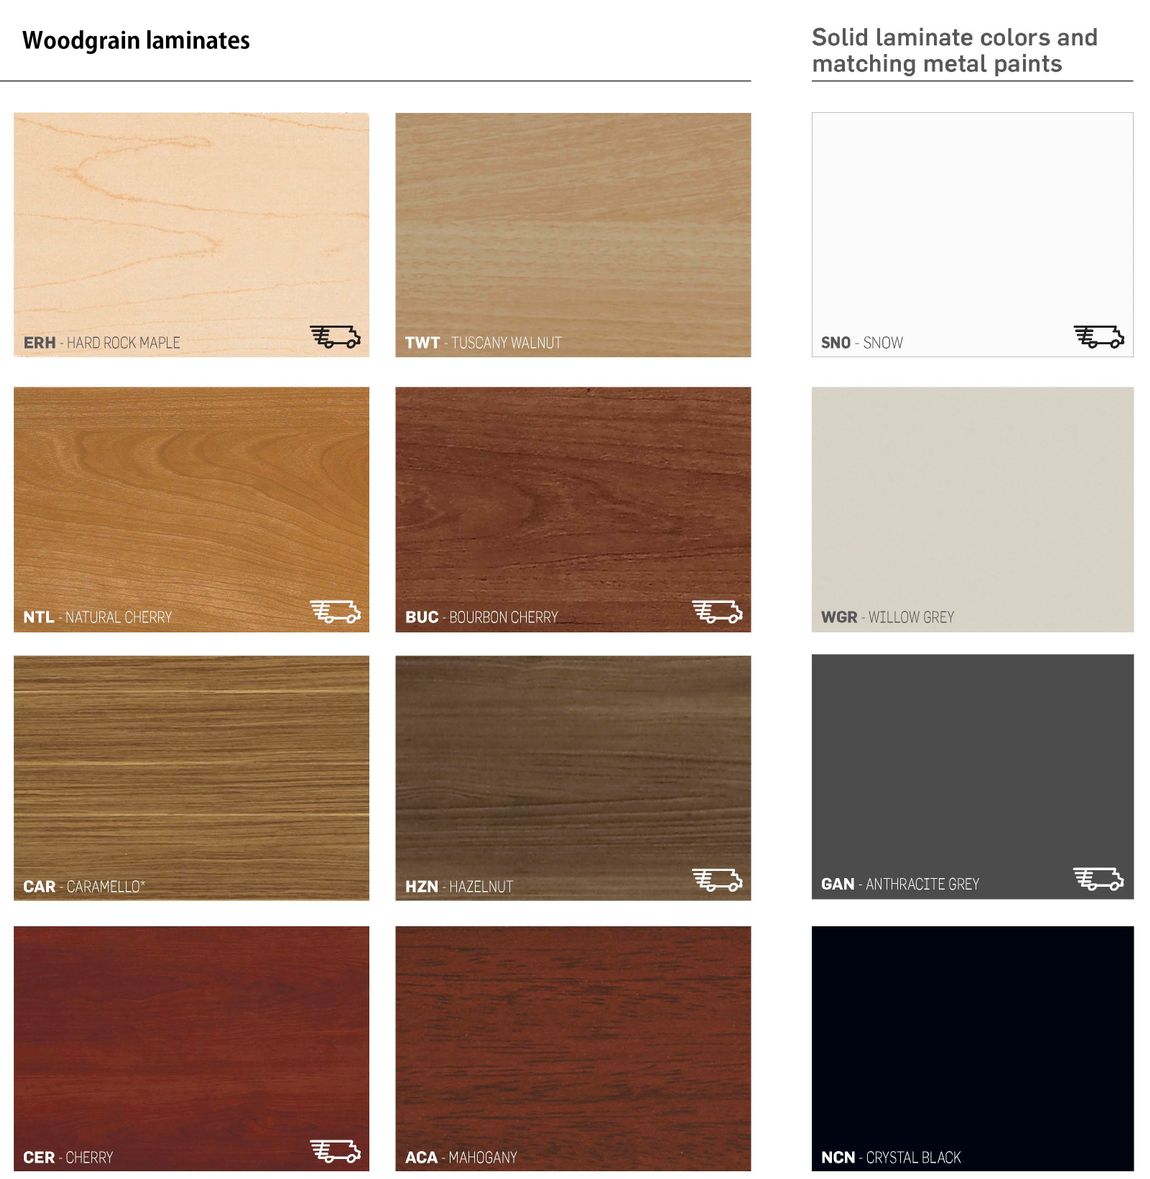 Laminate and Metal Paint Options 